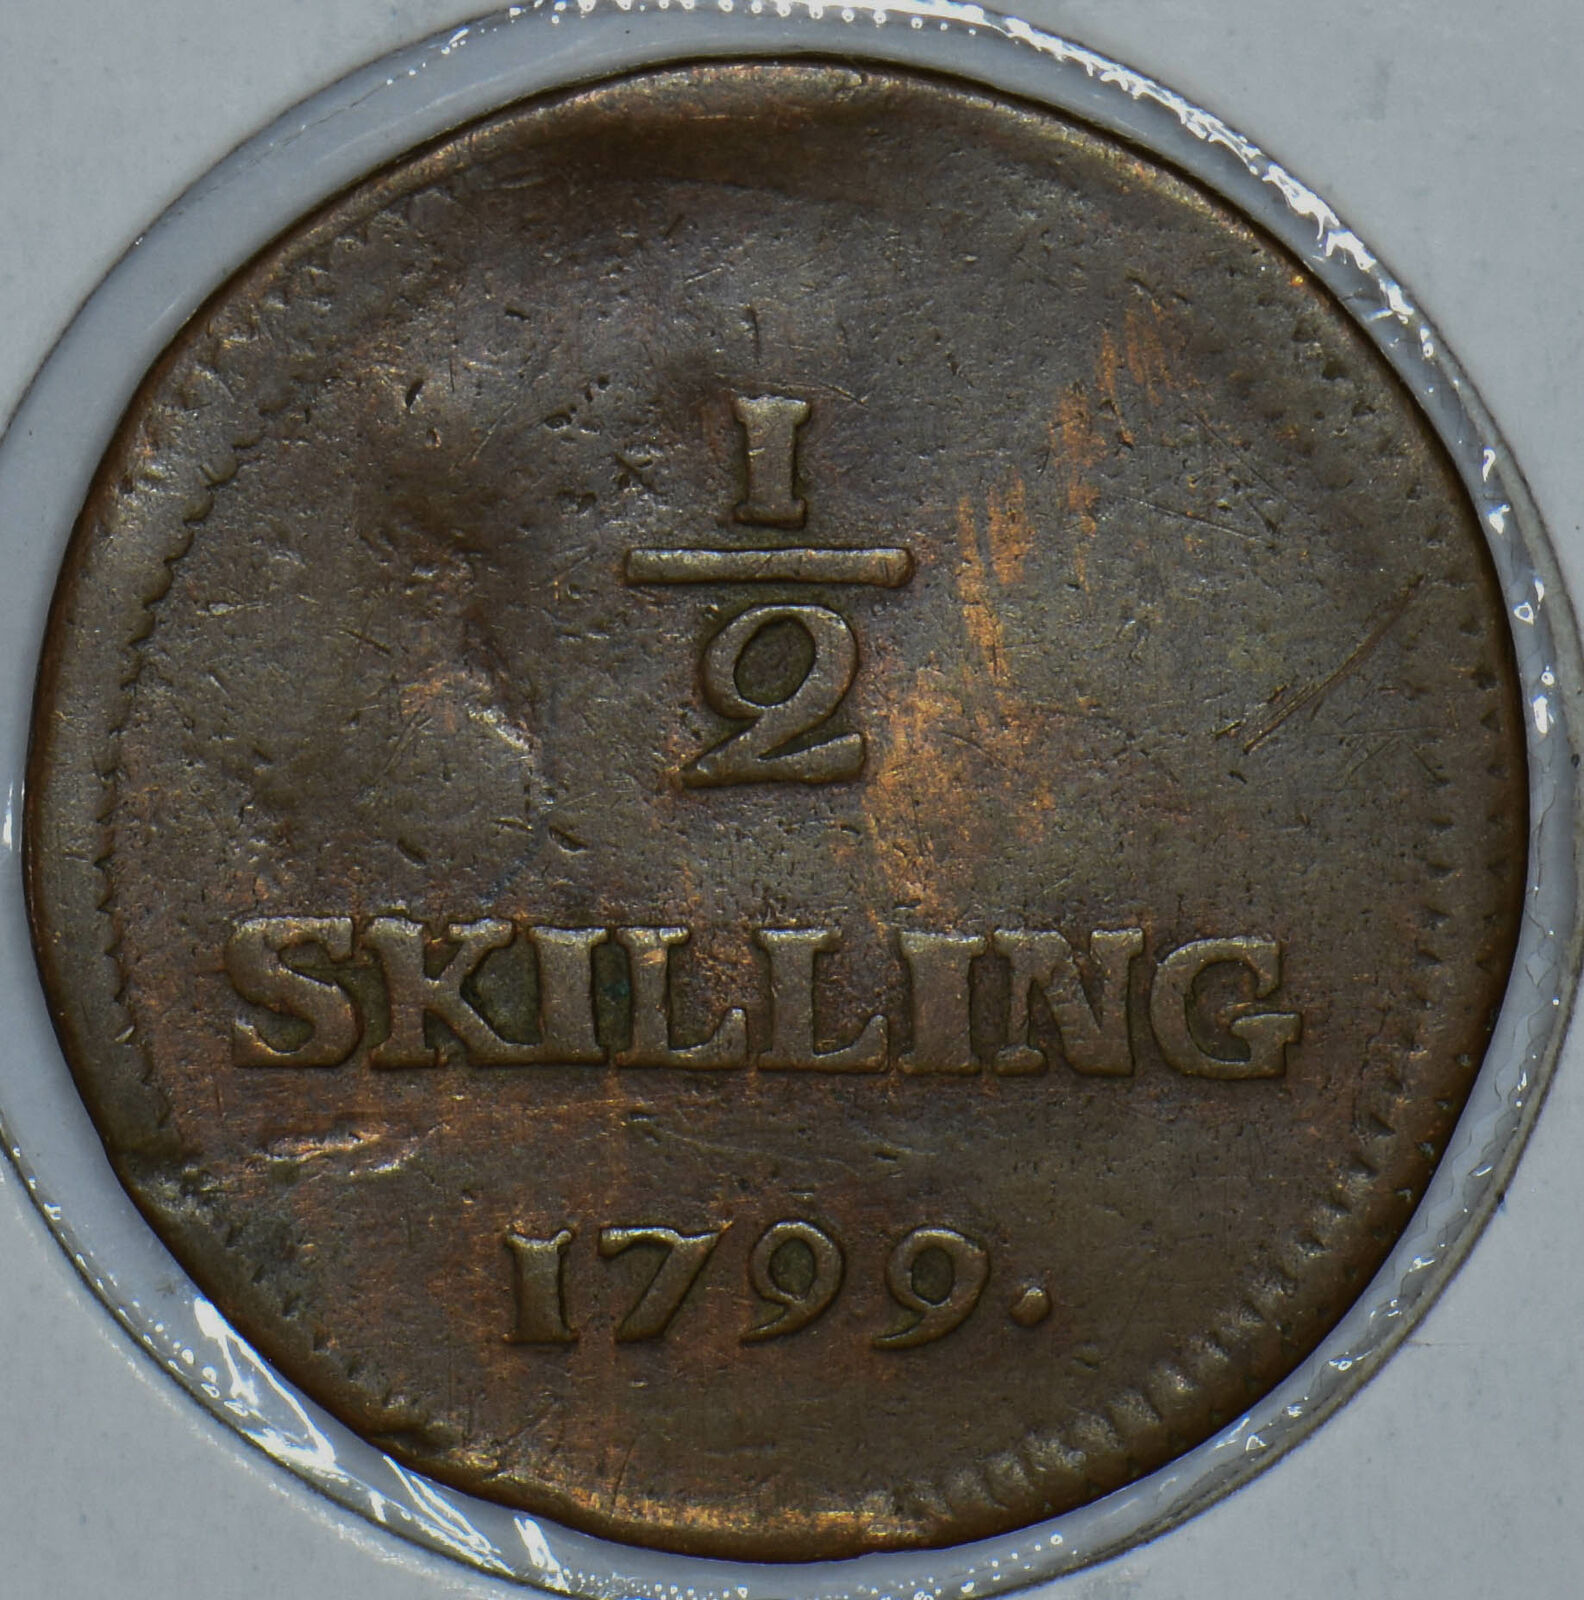 Sweden 1799 1/2 Skilling 290824 combine shipping